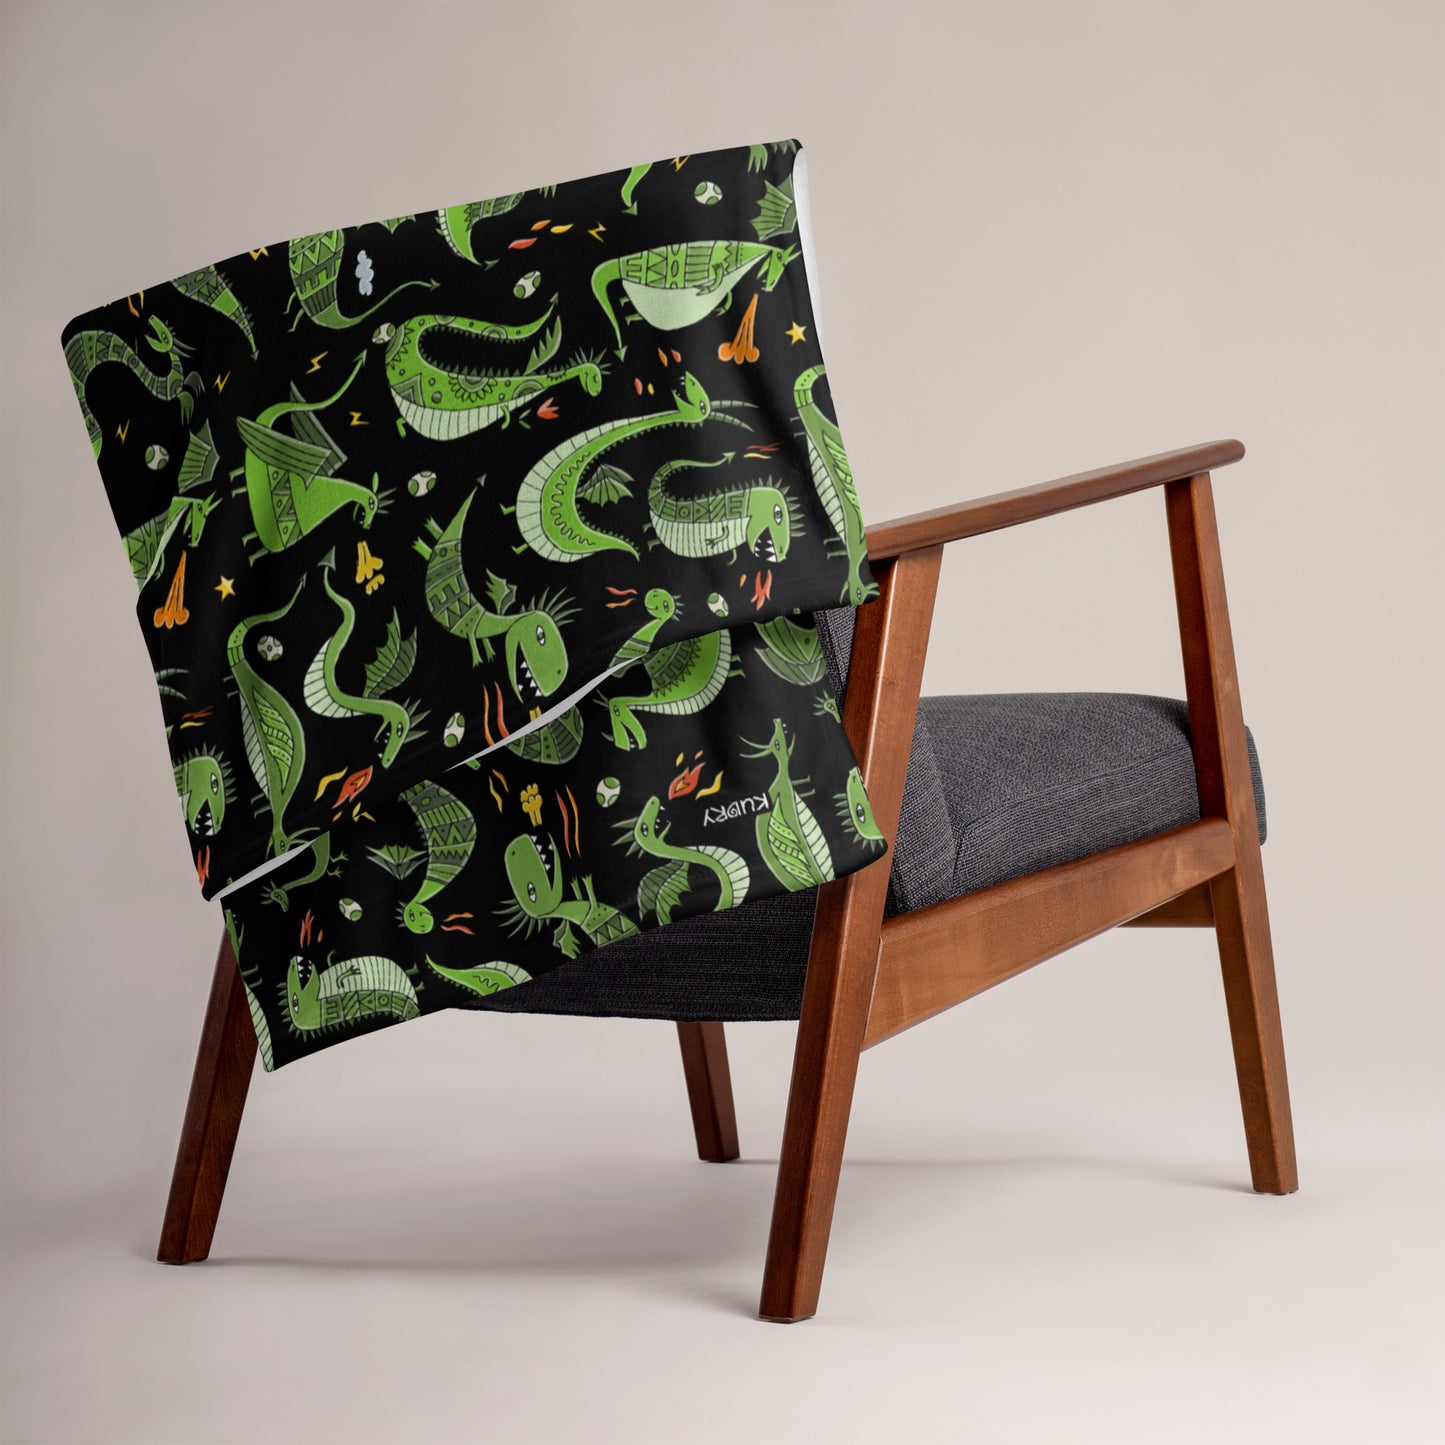 Black blanket 50х60 with funny green dragons on chair